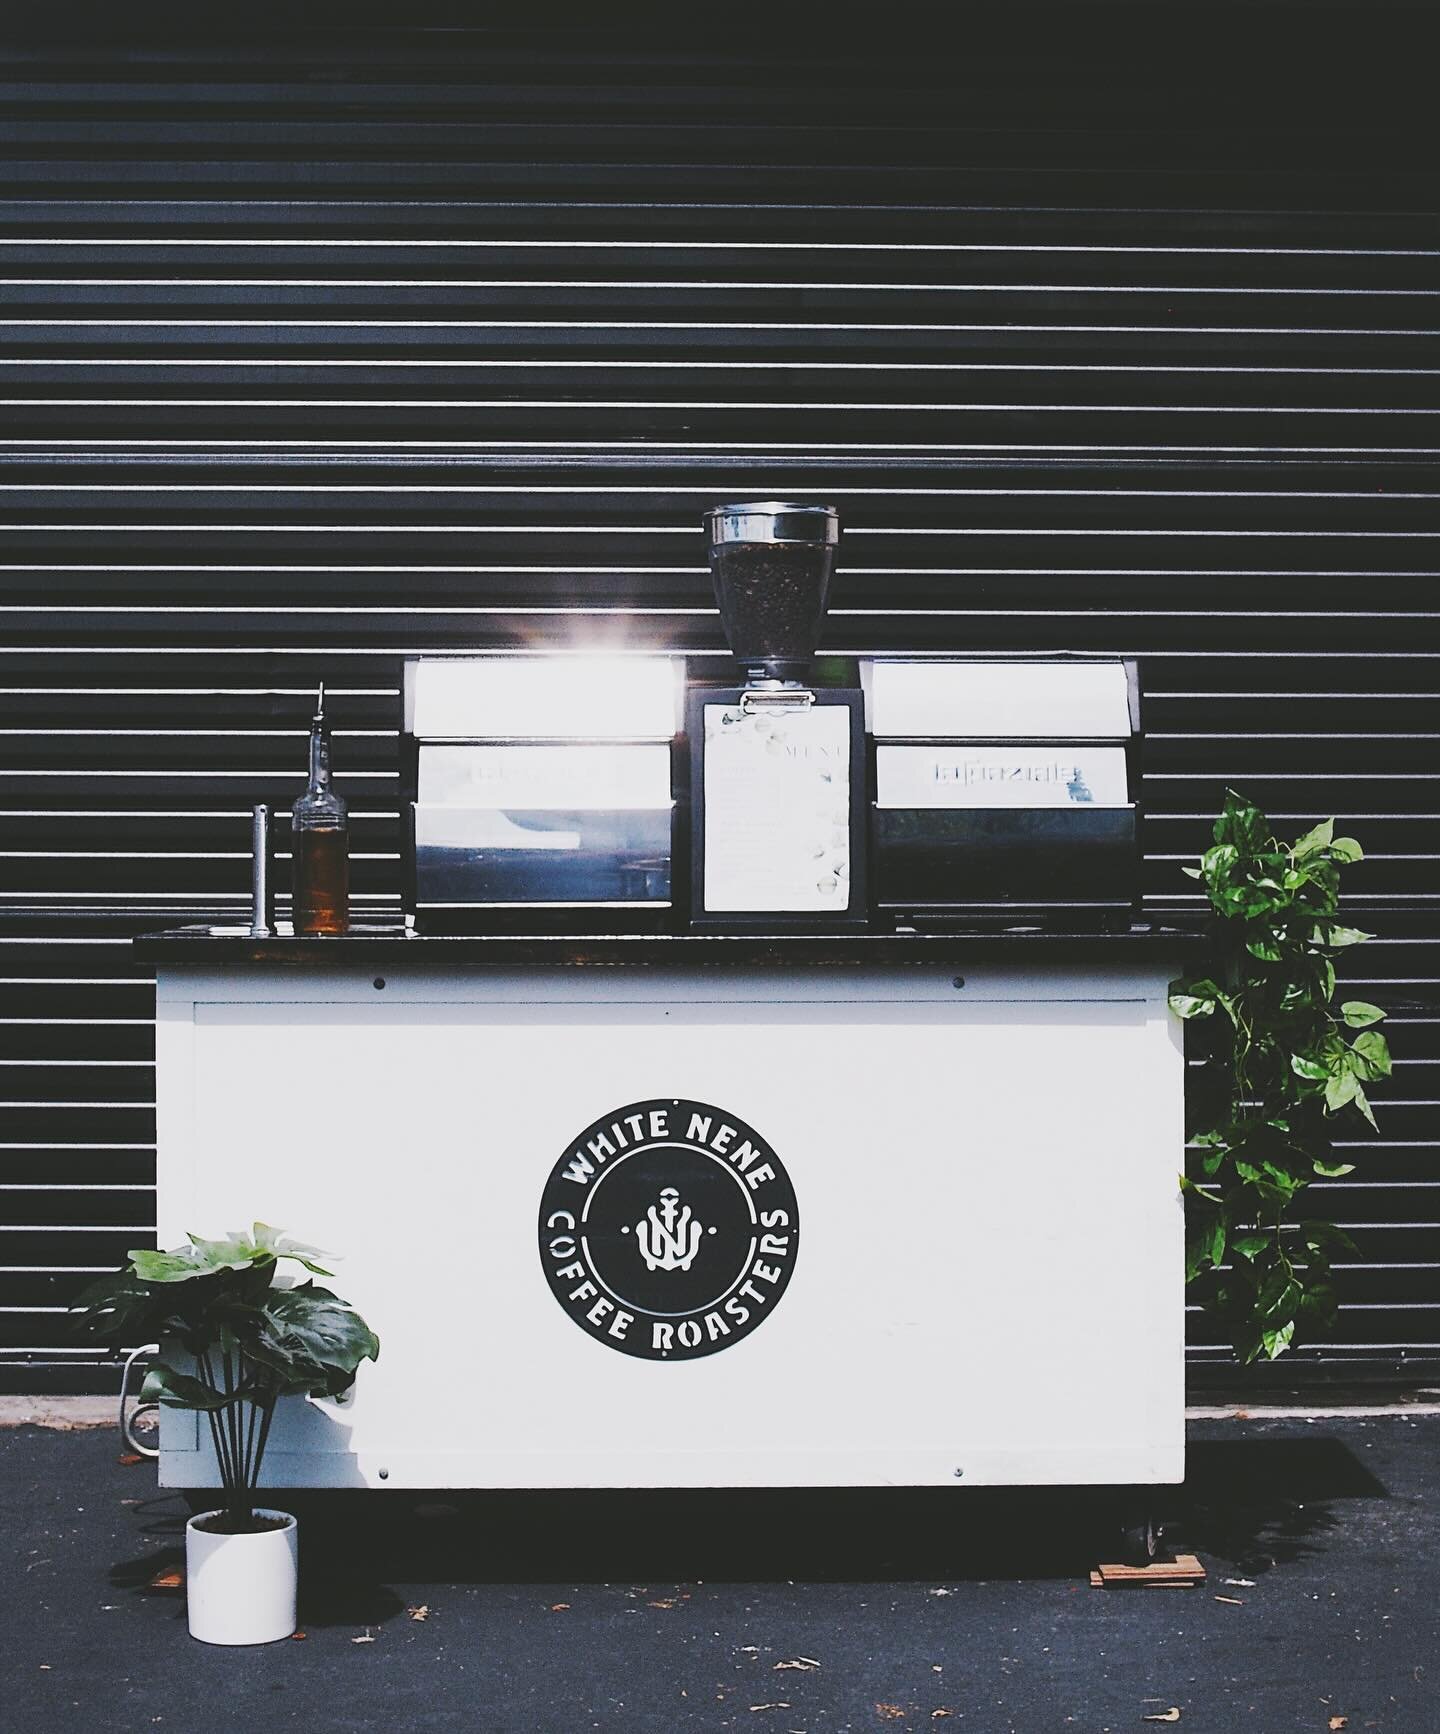 Looking for amazing coffee for an upcoming event?Thanks to our mobile espresso cart, we&rsquo;re able to serve craft espresso drinks literally anywhere. Head over to our website and fill out our catering form for a quick quote. Let us bring an unforg